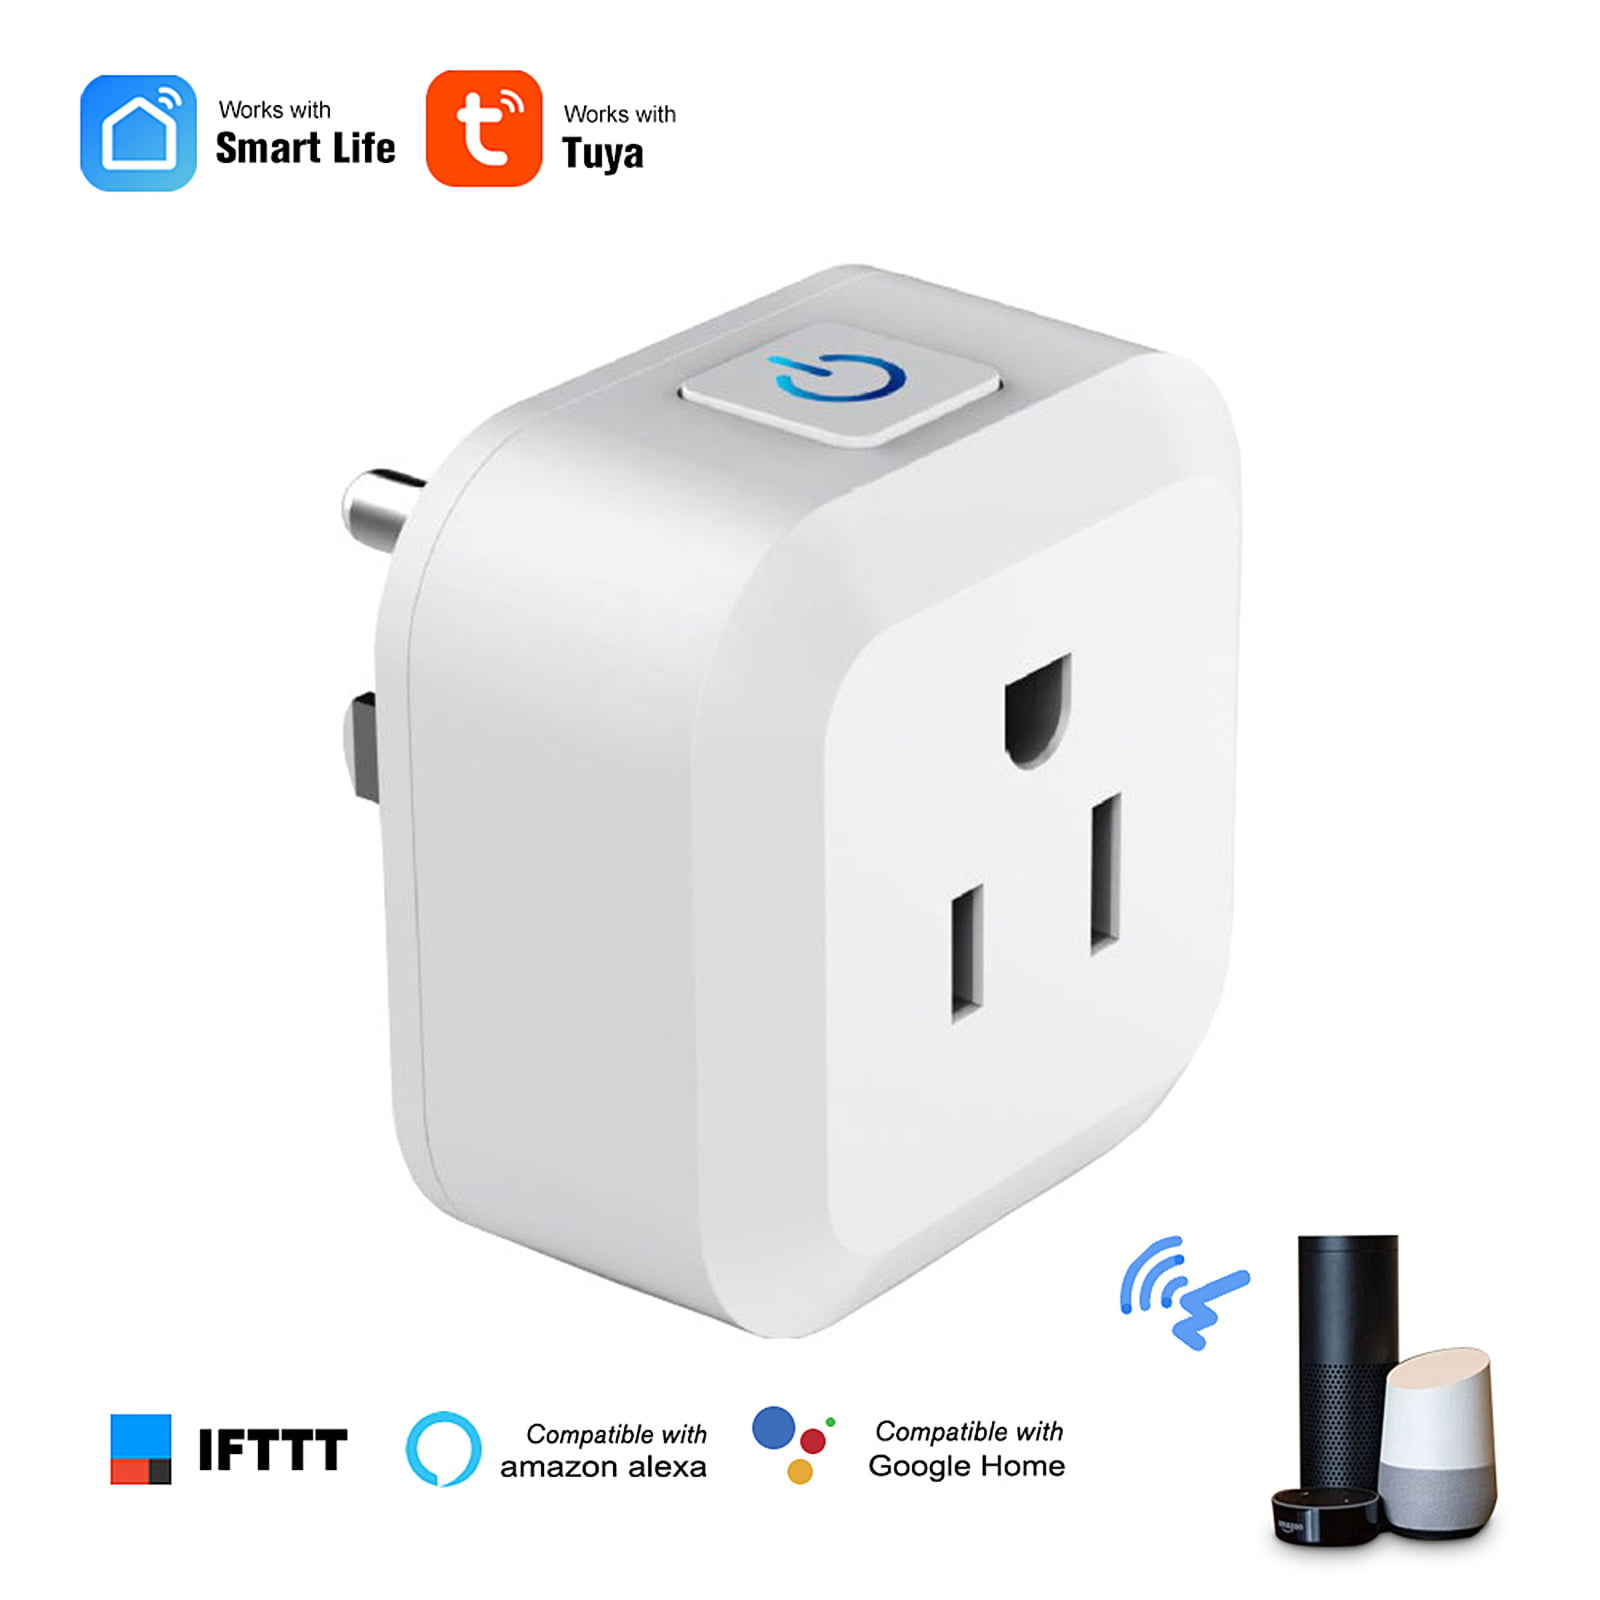 Details about   WiFi Smart Plugs Power Socket Outlets Switches Remote Amazon Alexa Google Home